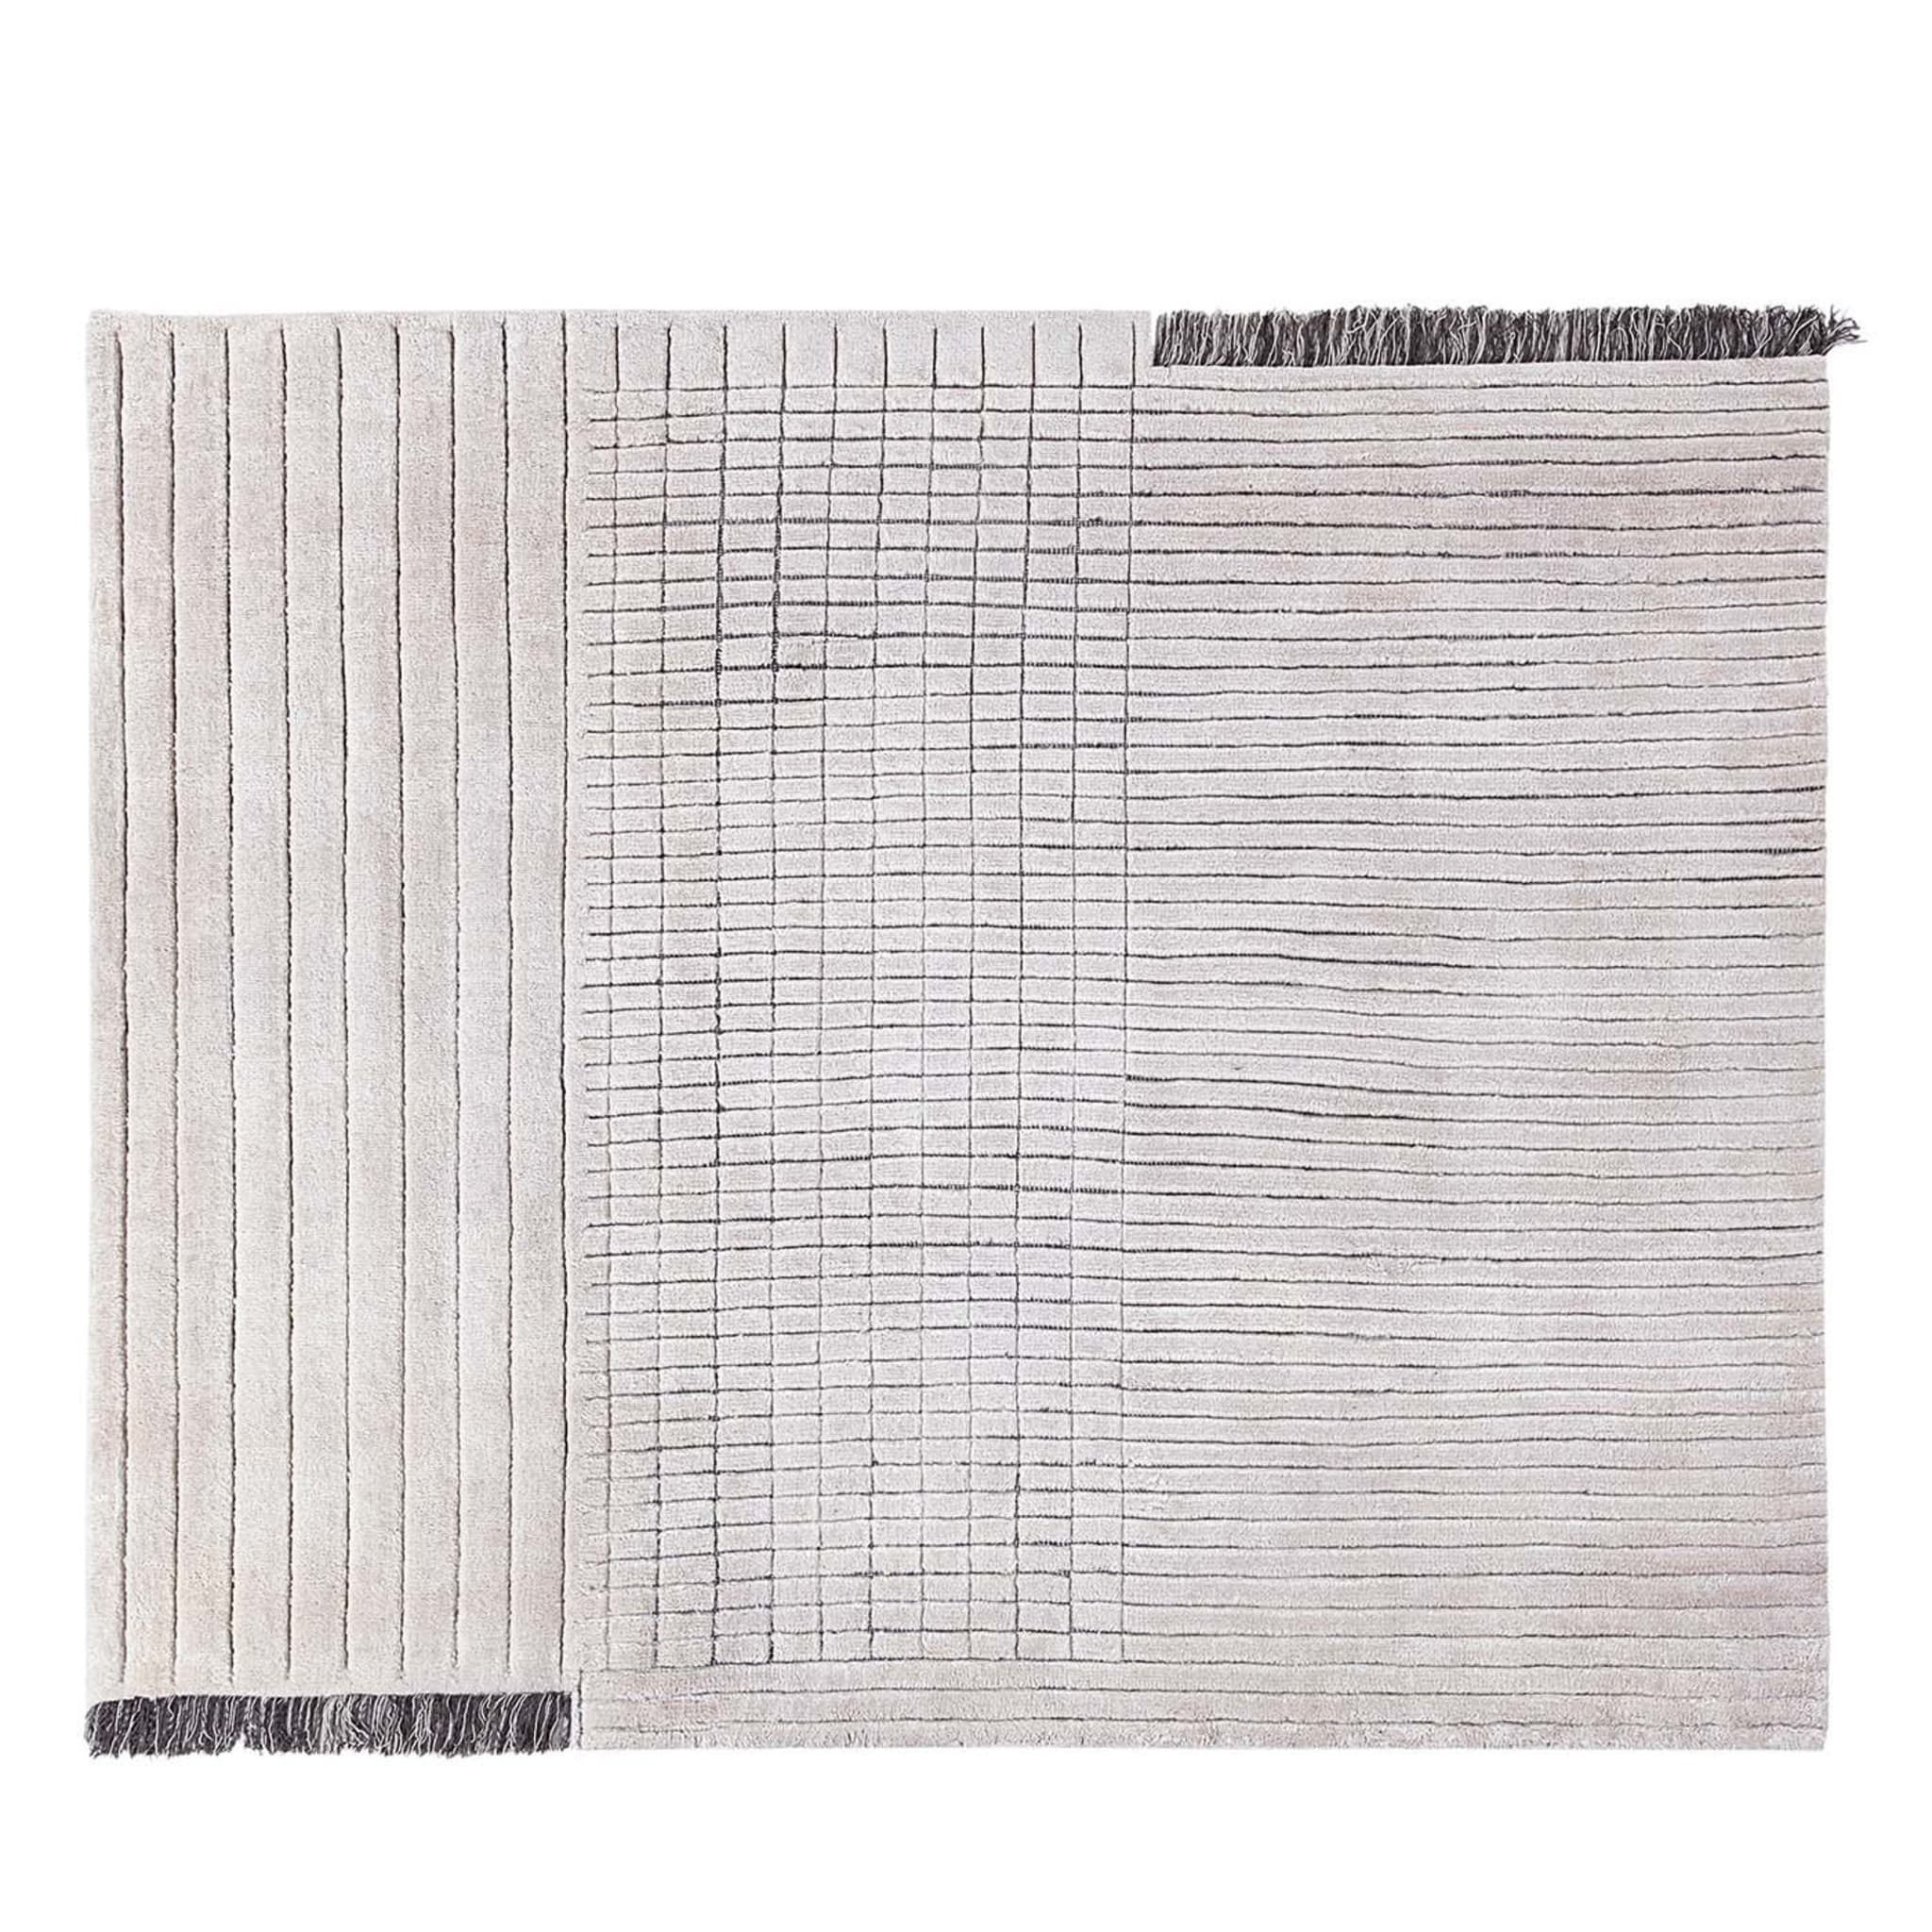 RD Grid Berber Ivory and Brown Carpet by Rodolfo Dordoni - Main view